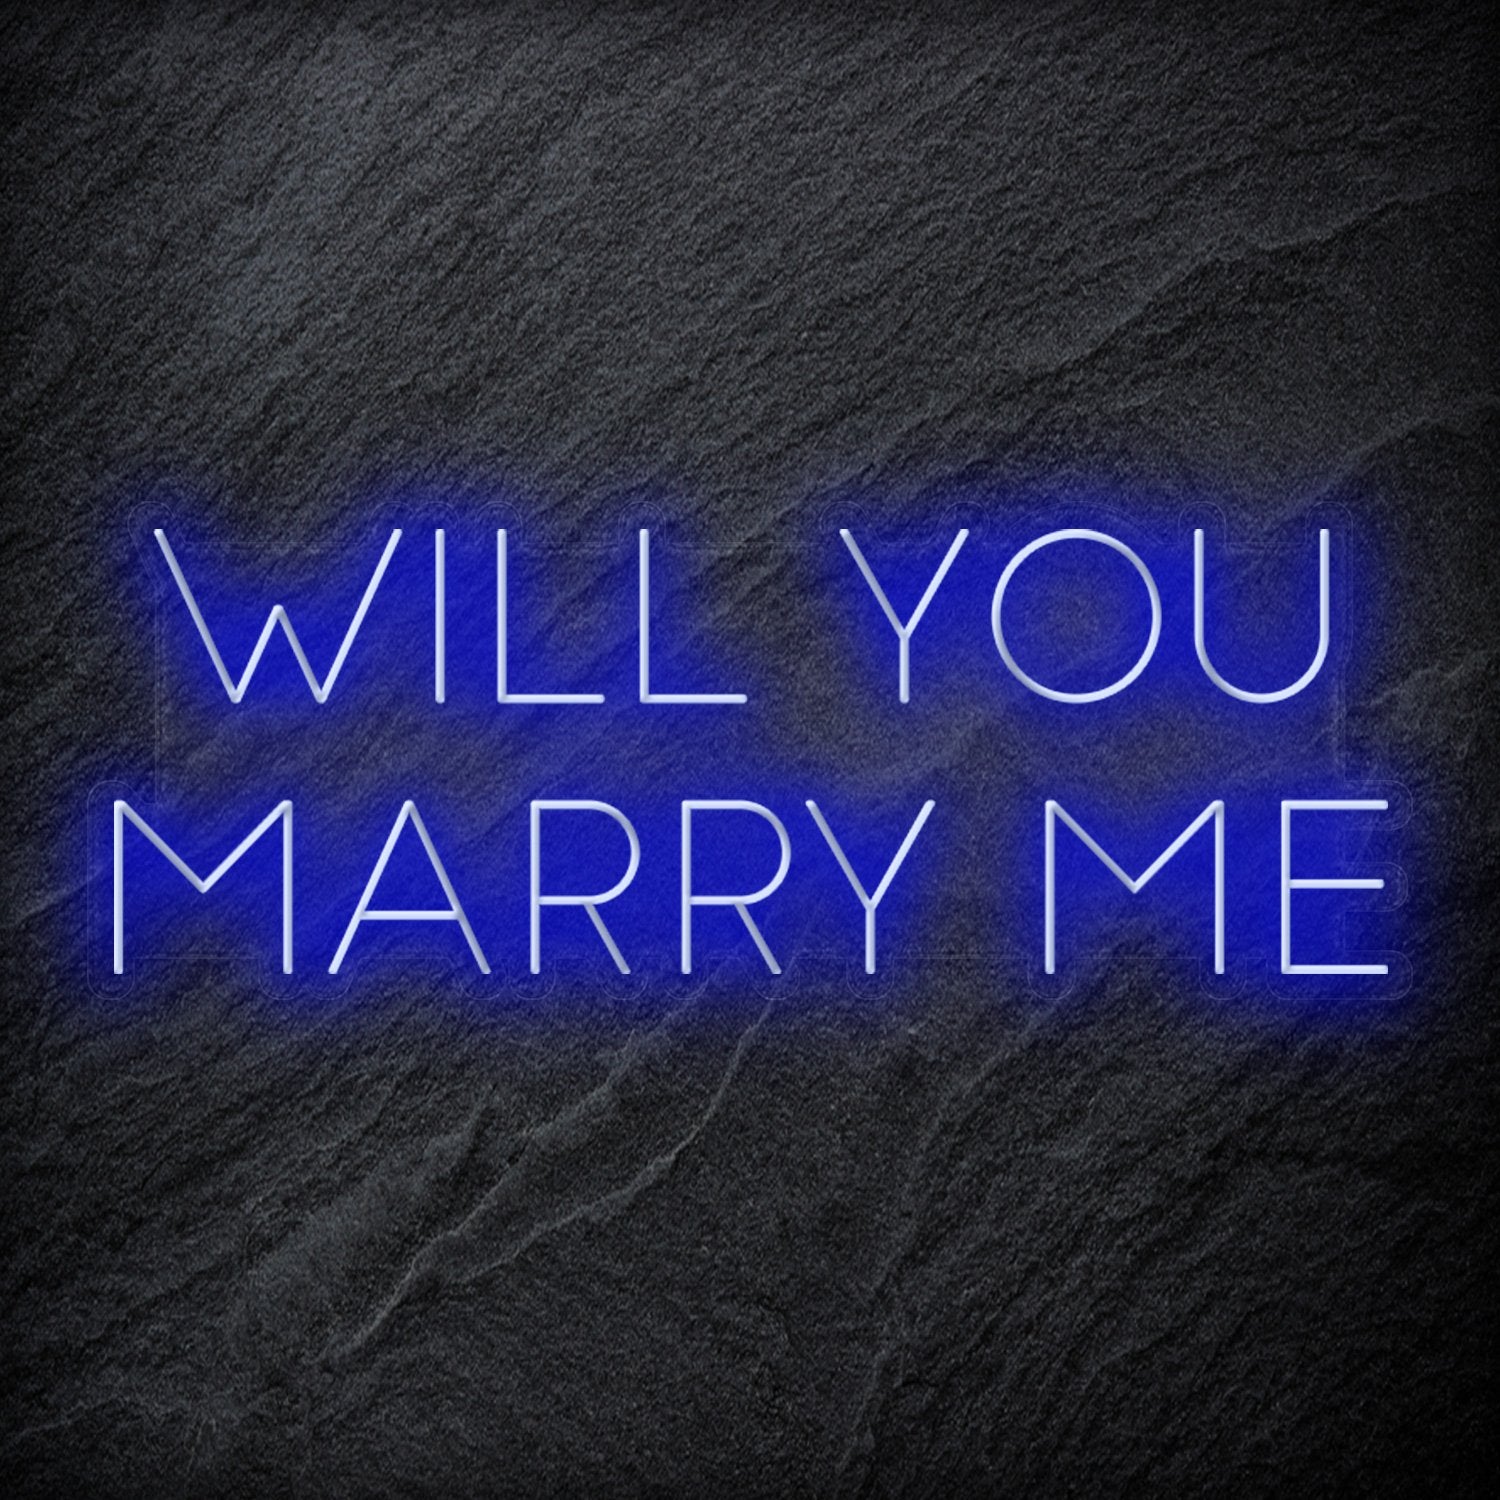 "Will You Marry Me" LED Neon Sign Schriftzug - NEONEVERGLOW